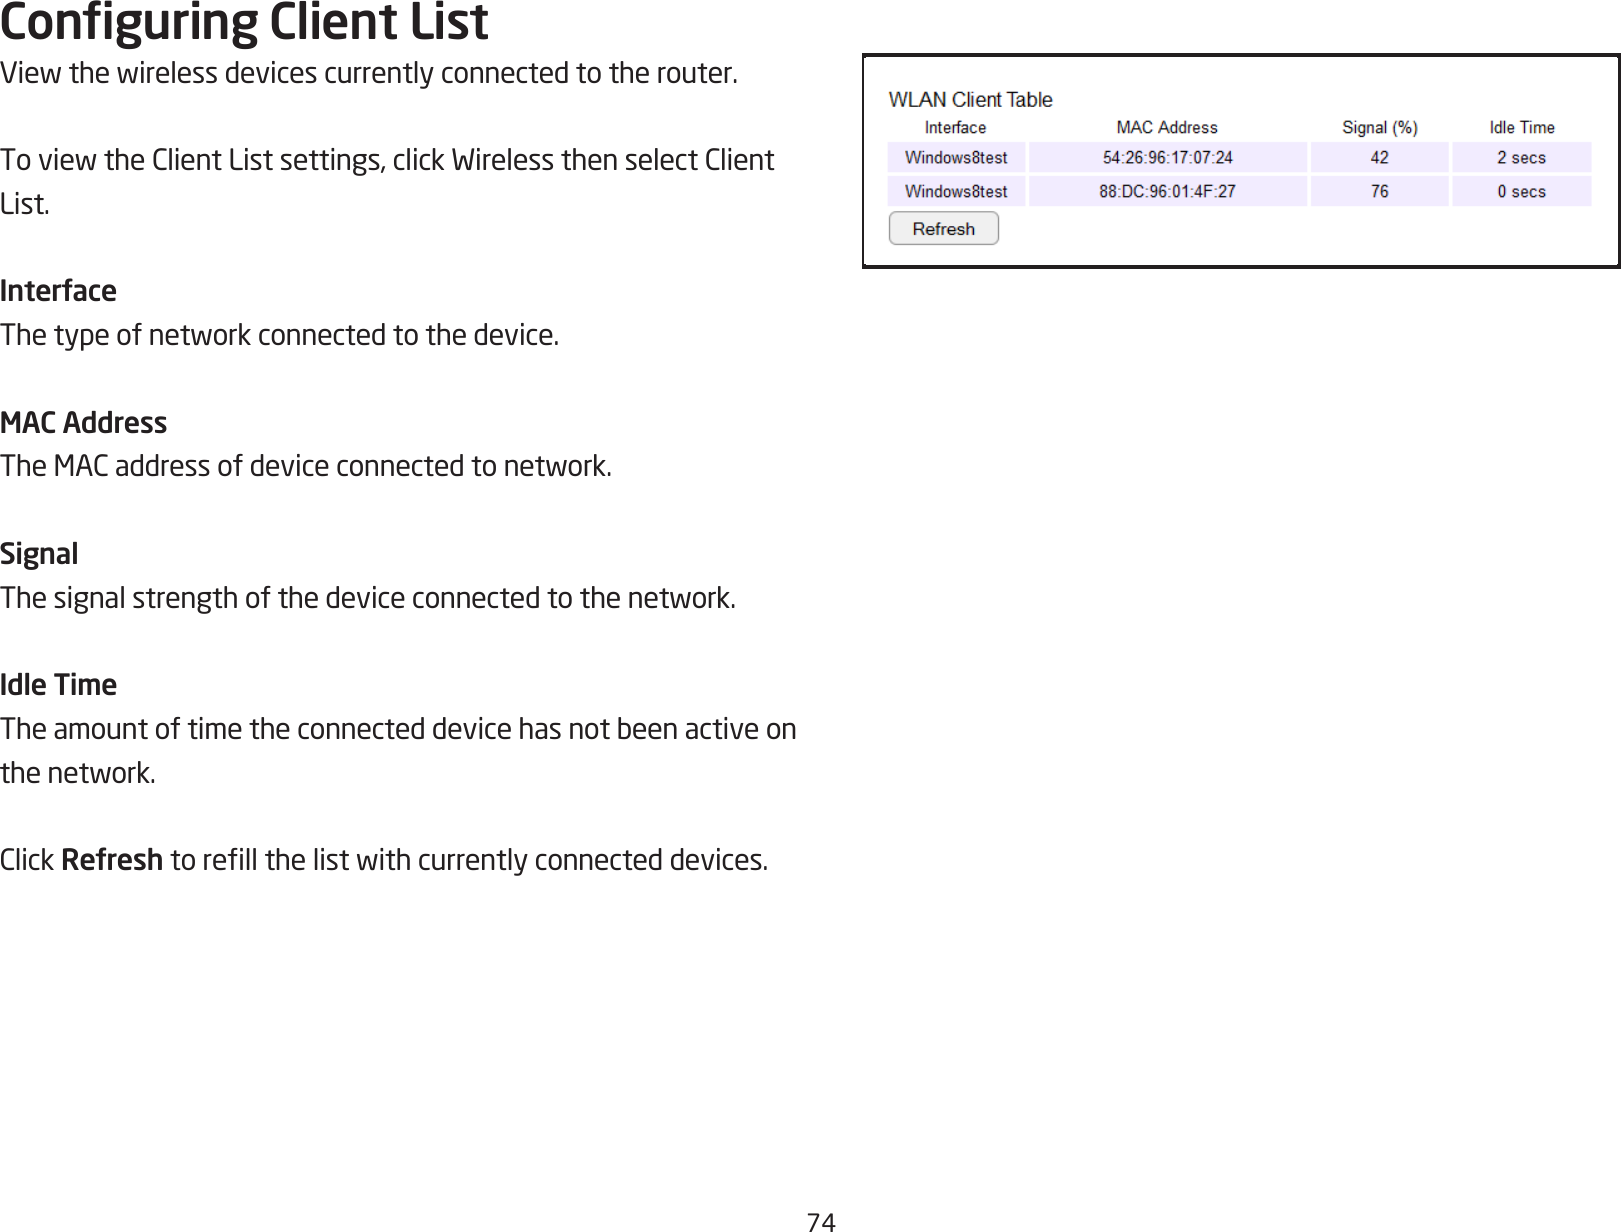 74Conguring Client ListViewthewirelessdevicescurrentlyconnectedtotherouter.ToviewtheClientListsettings,clickWirelessthenselectClientList.InterfaceThetypeofnetworkconnectedtothedevice.MAC AddressTheMACaddressofdeviceconnectedtonetwork.SignalThesignalstrengthofthedeviceconnectedtothenetwork.Idle TimeTheamountoftimetheconnecteddevicehasnotbeenactiveonthenetwork.ClickRefreshtorellthelistwithcurrentlyconnecteddevices.